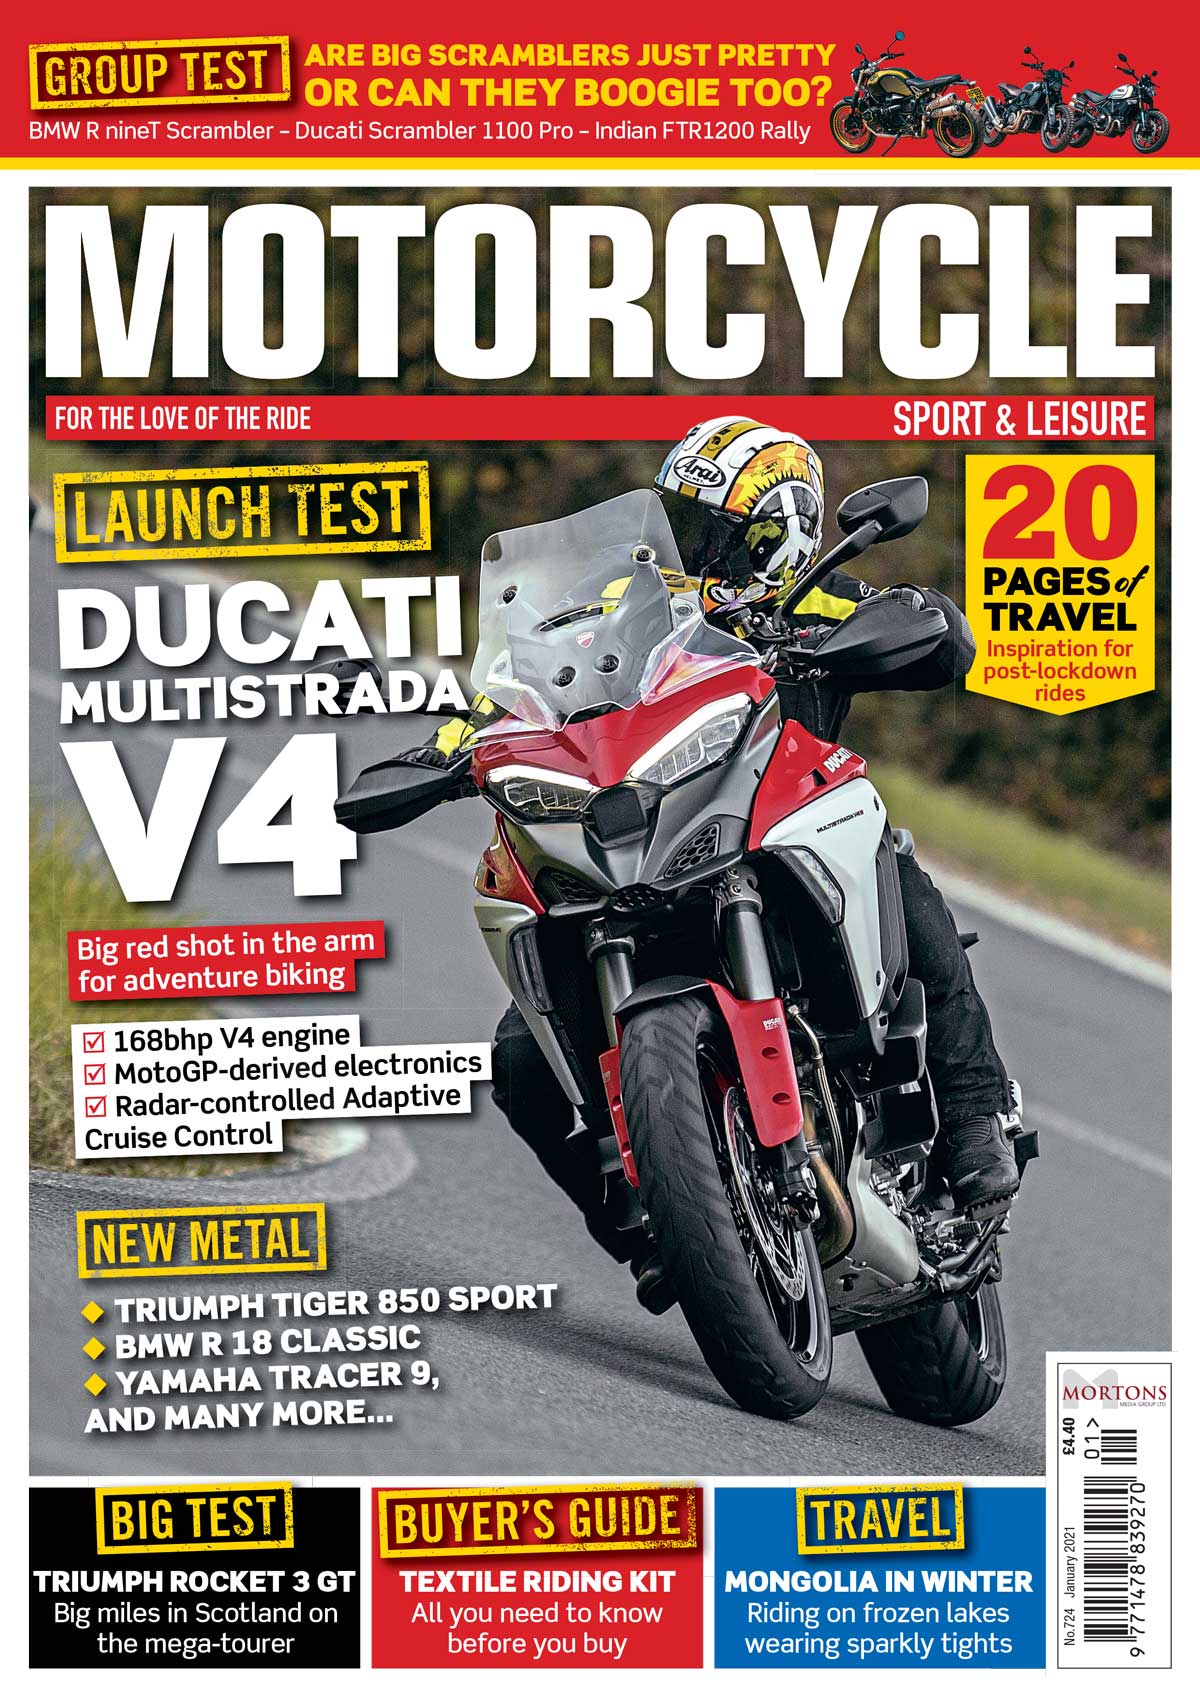 PREVIEW: January issue of Motorcycle Sport & Leisure